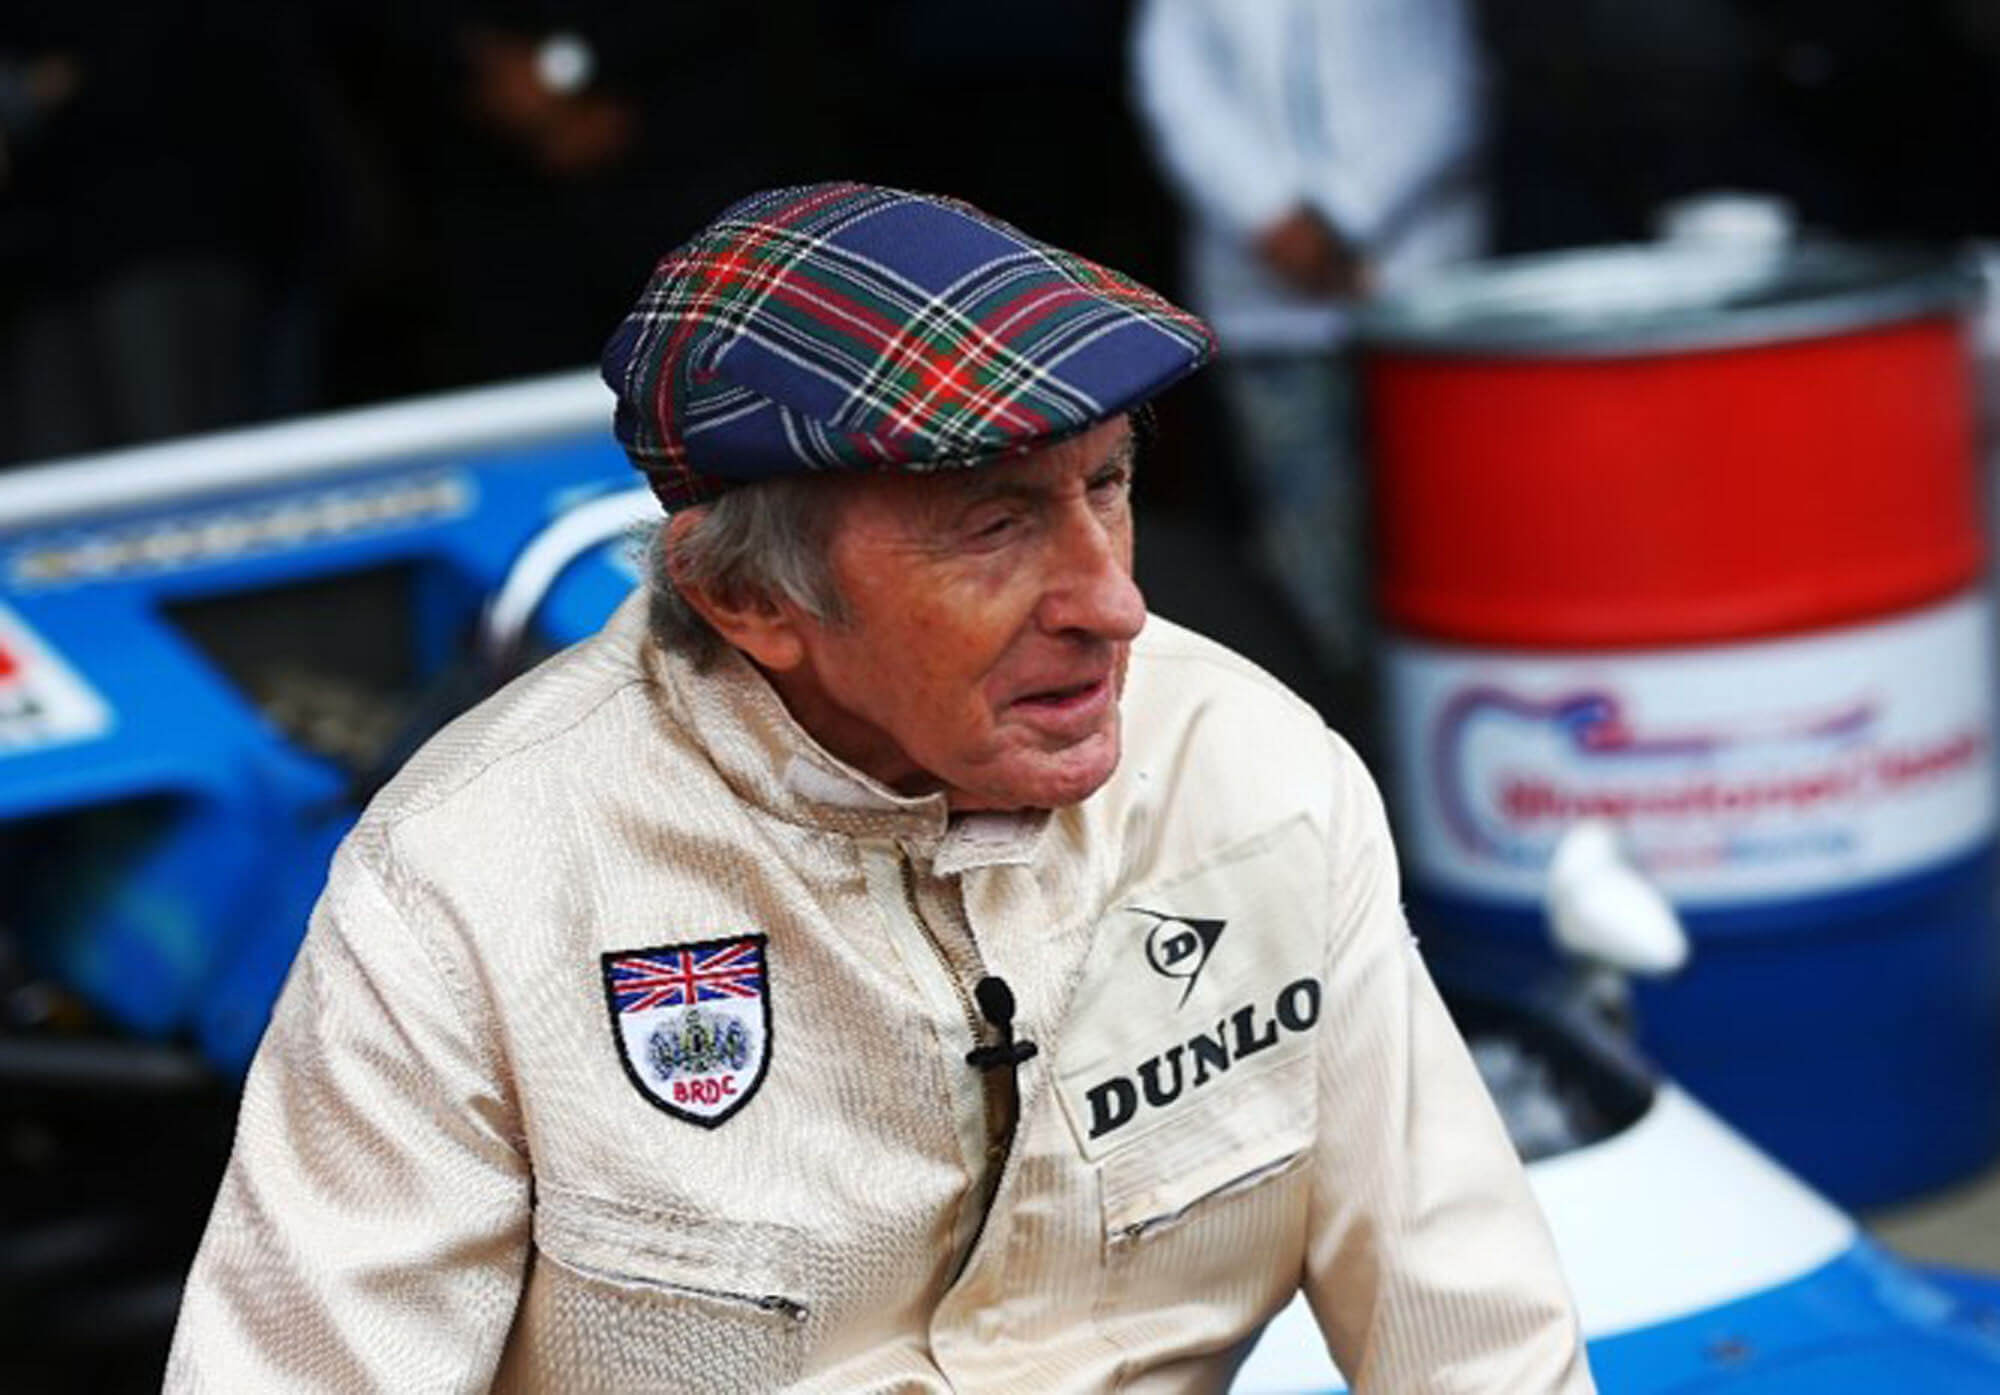 Sir Jackie Stewart sitting in front of his race-winning blue Matra MS80-02 at The Classic 2019 at Silverstone